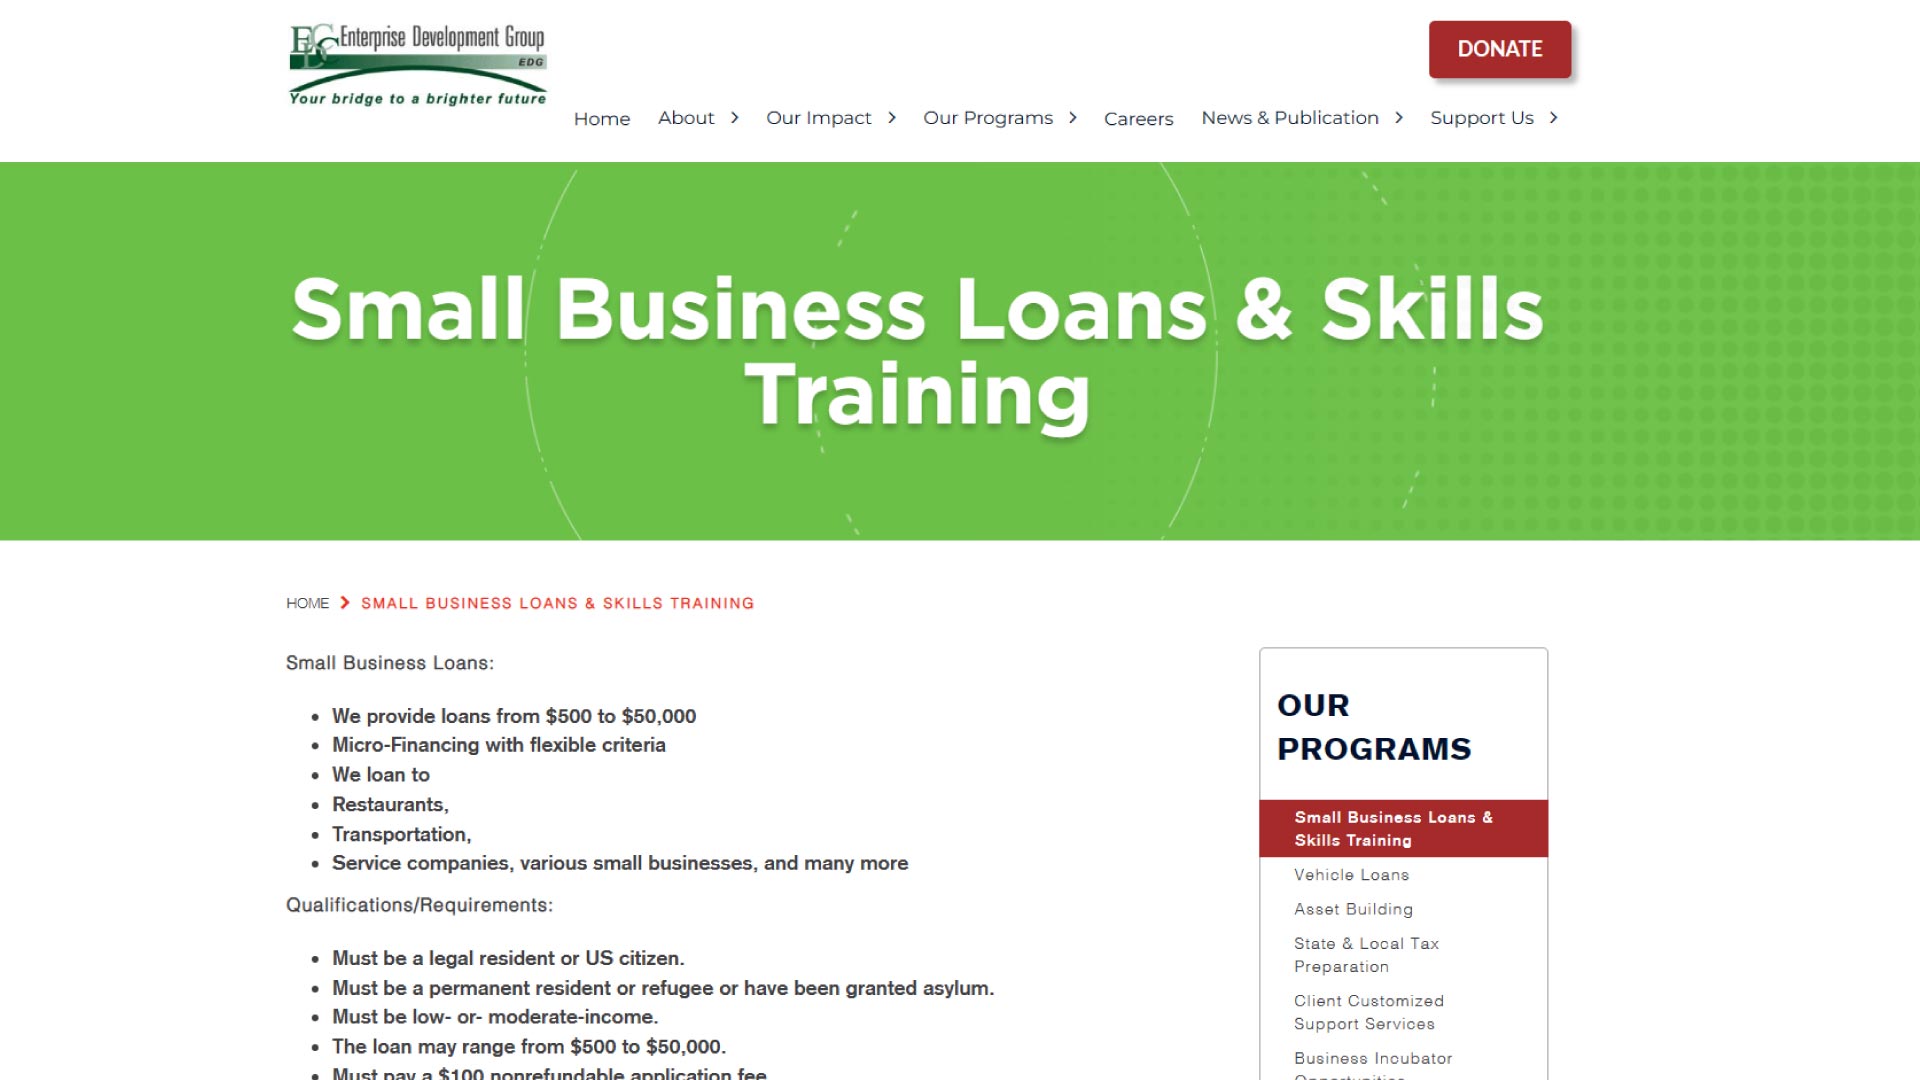 Before: Small Business Loans